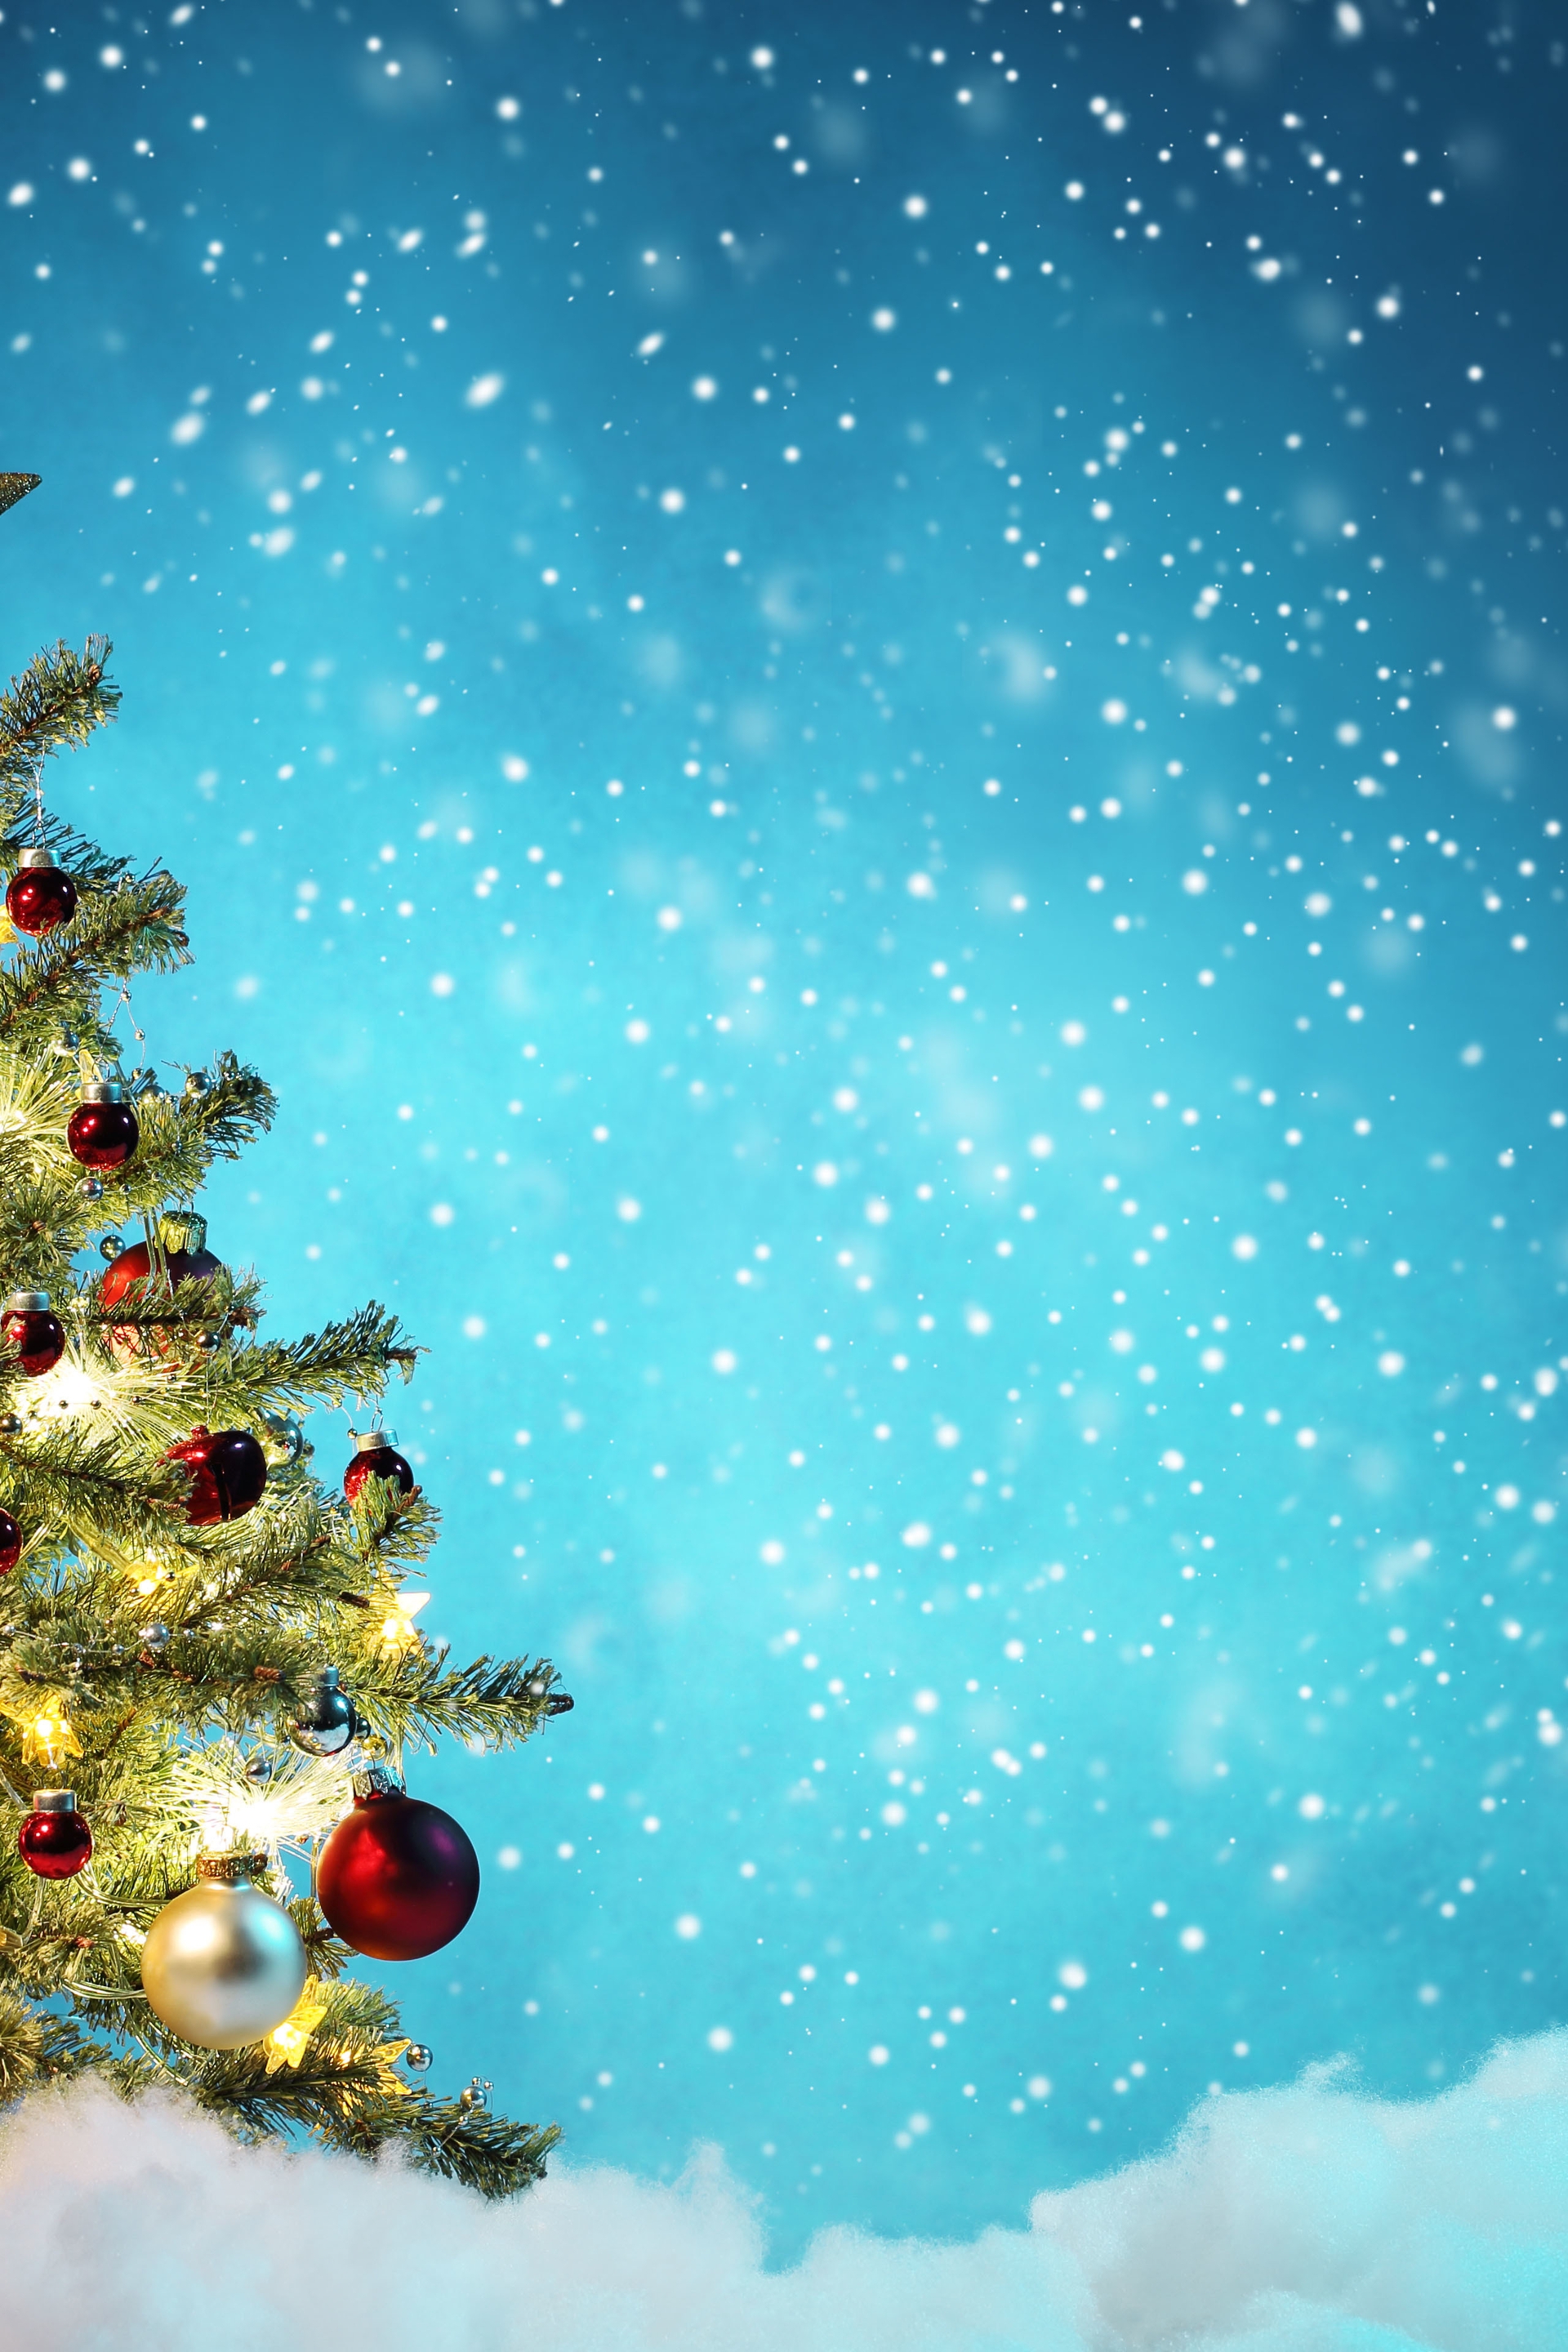 Image: Tree, holiday, new year, decorations, star, balls, toys, snow, falling, winter